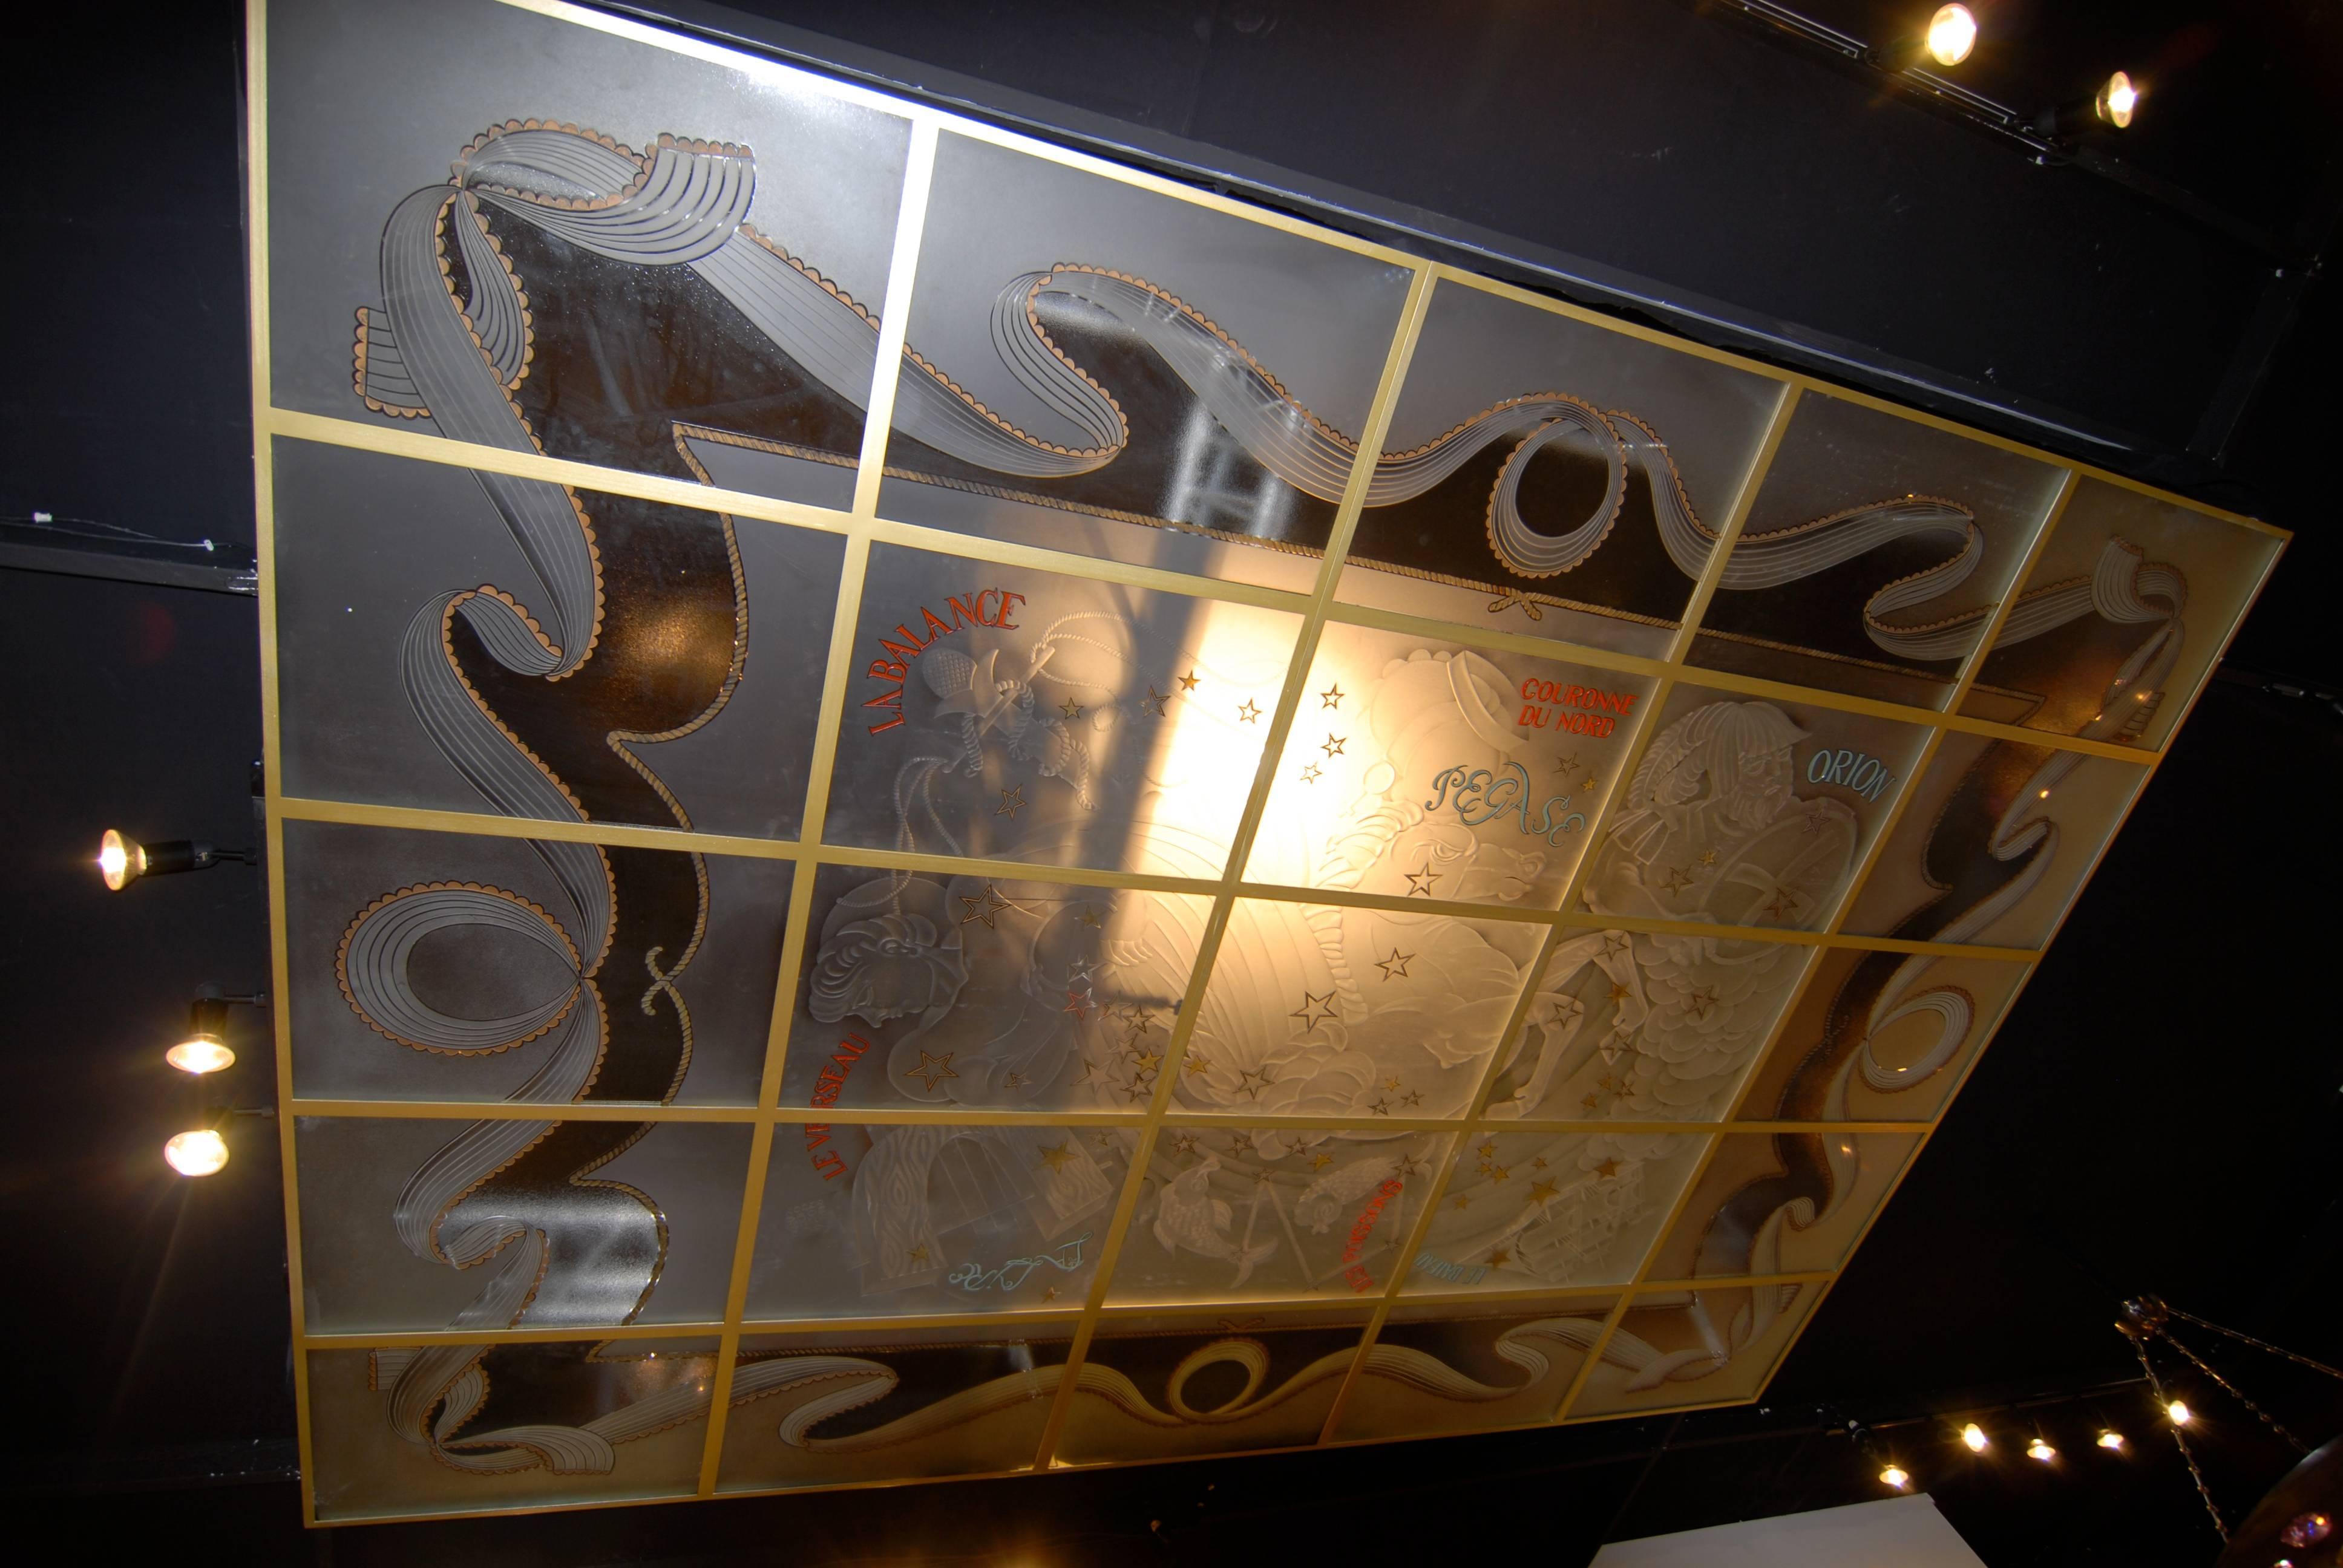 Very rare and extraordinary skylights, made of 25 engraved glass tile. Subject constellation an Greek Gods. One of a kind, signed by the artist 